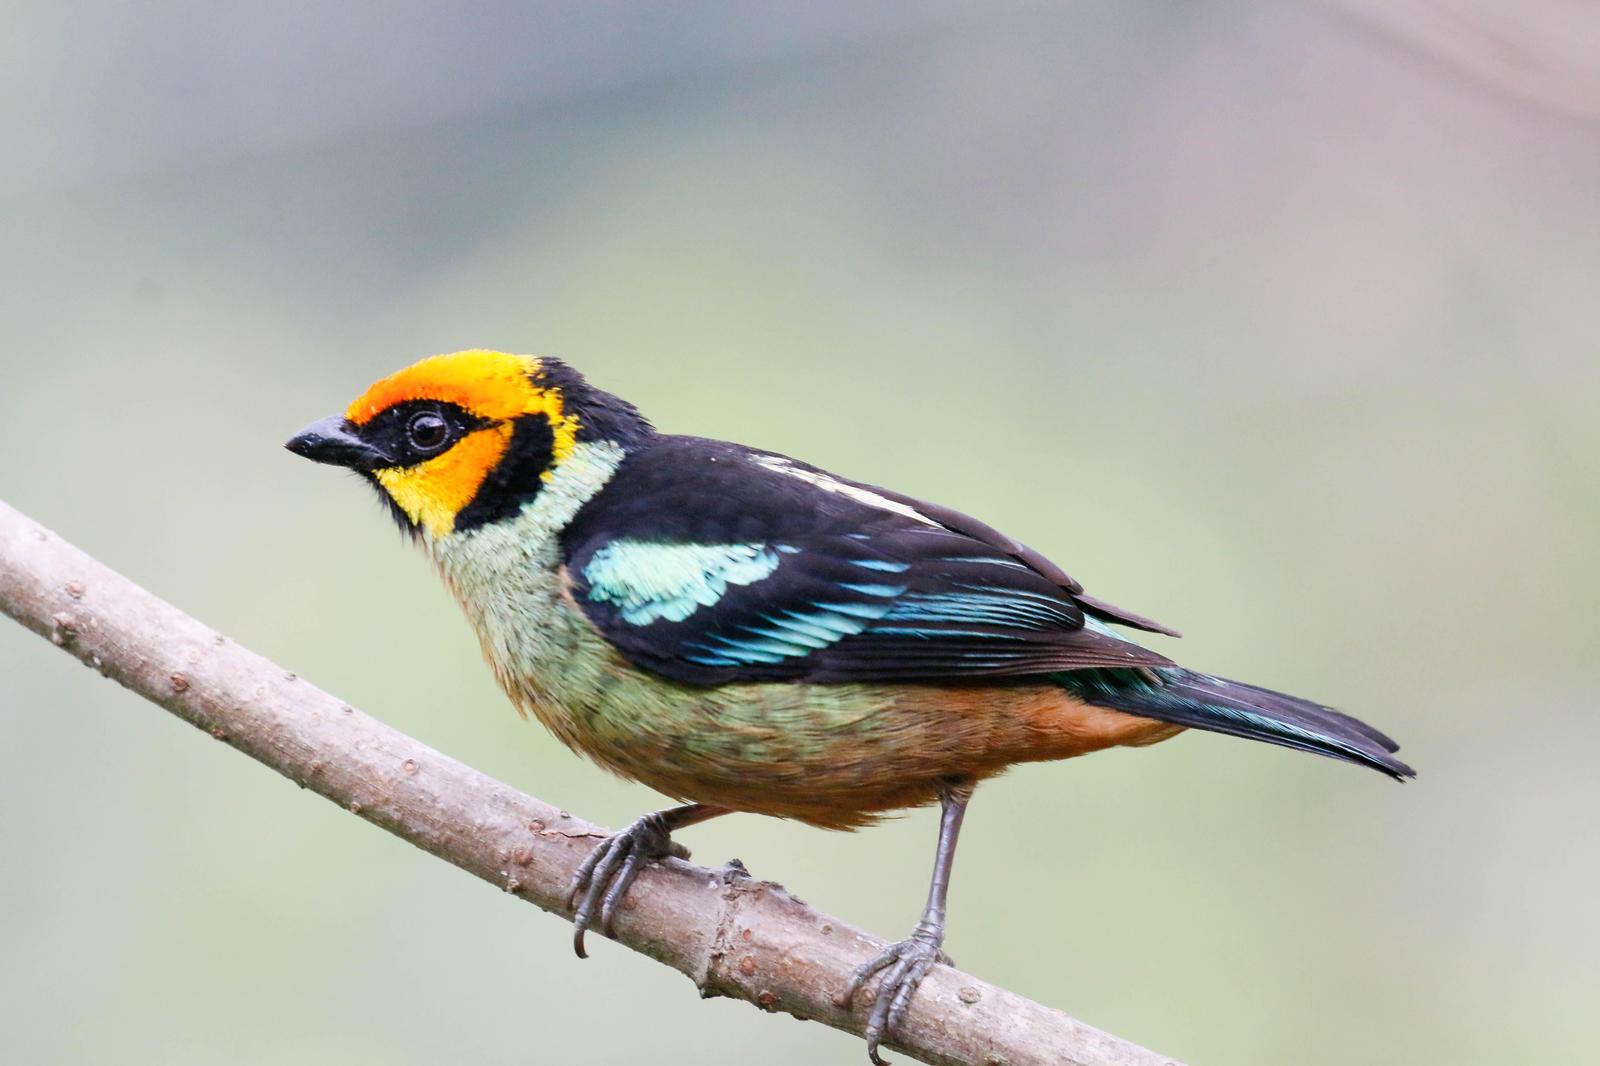 Flame-faced Tanager Photo by Thomas Driscoll